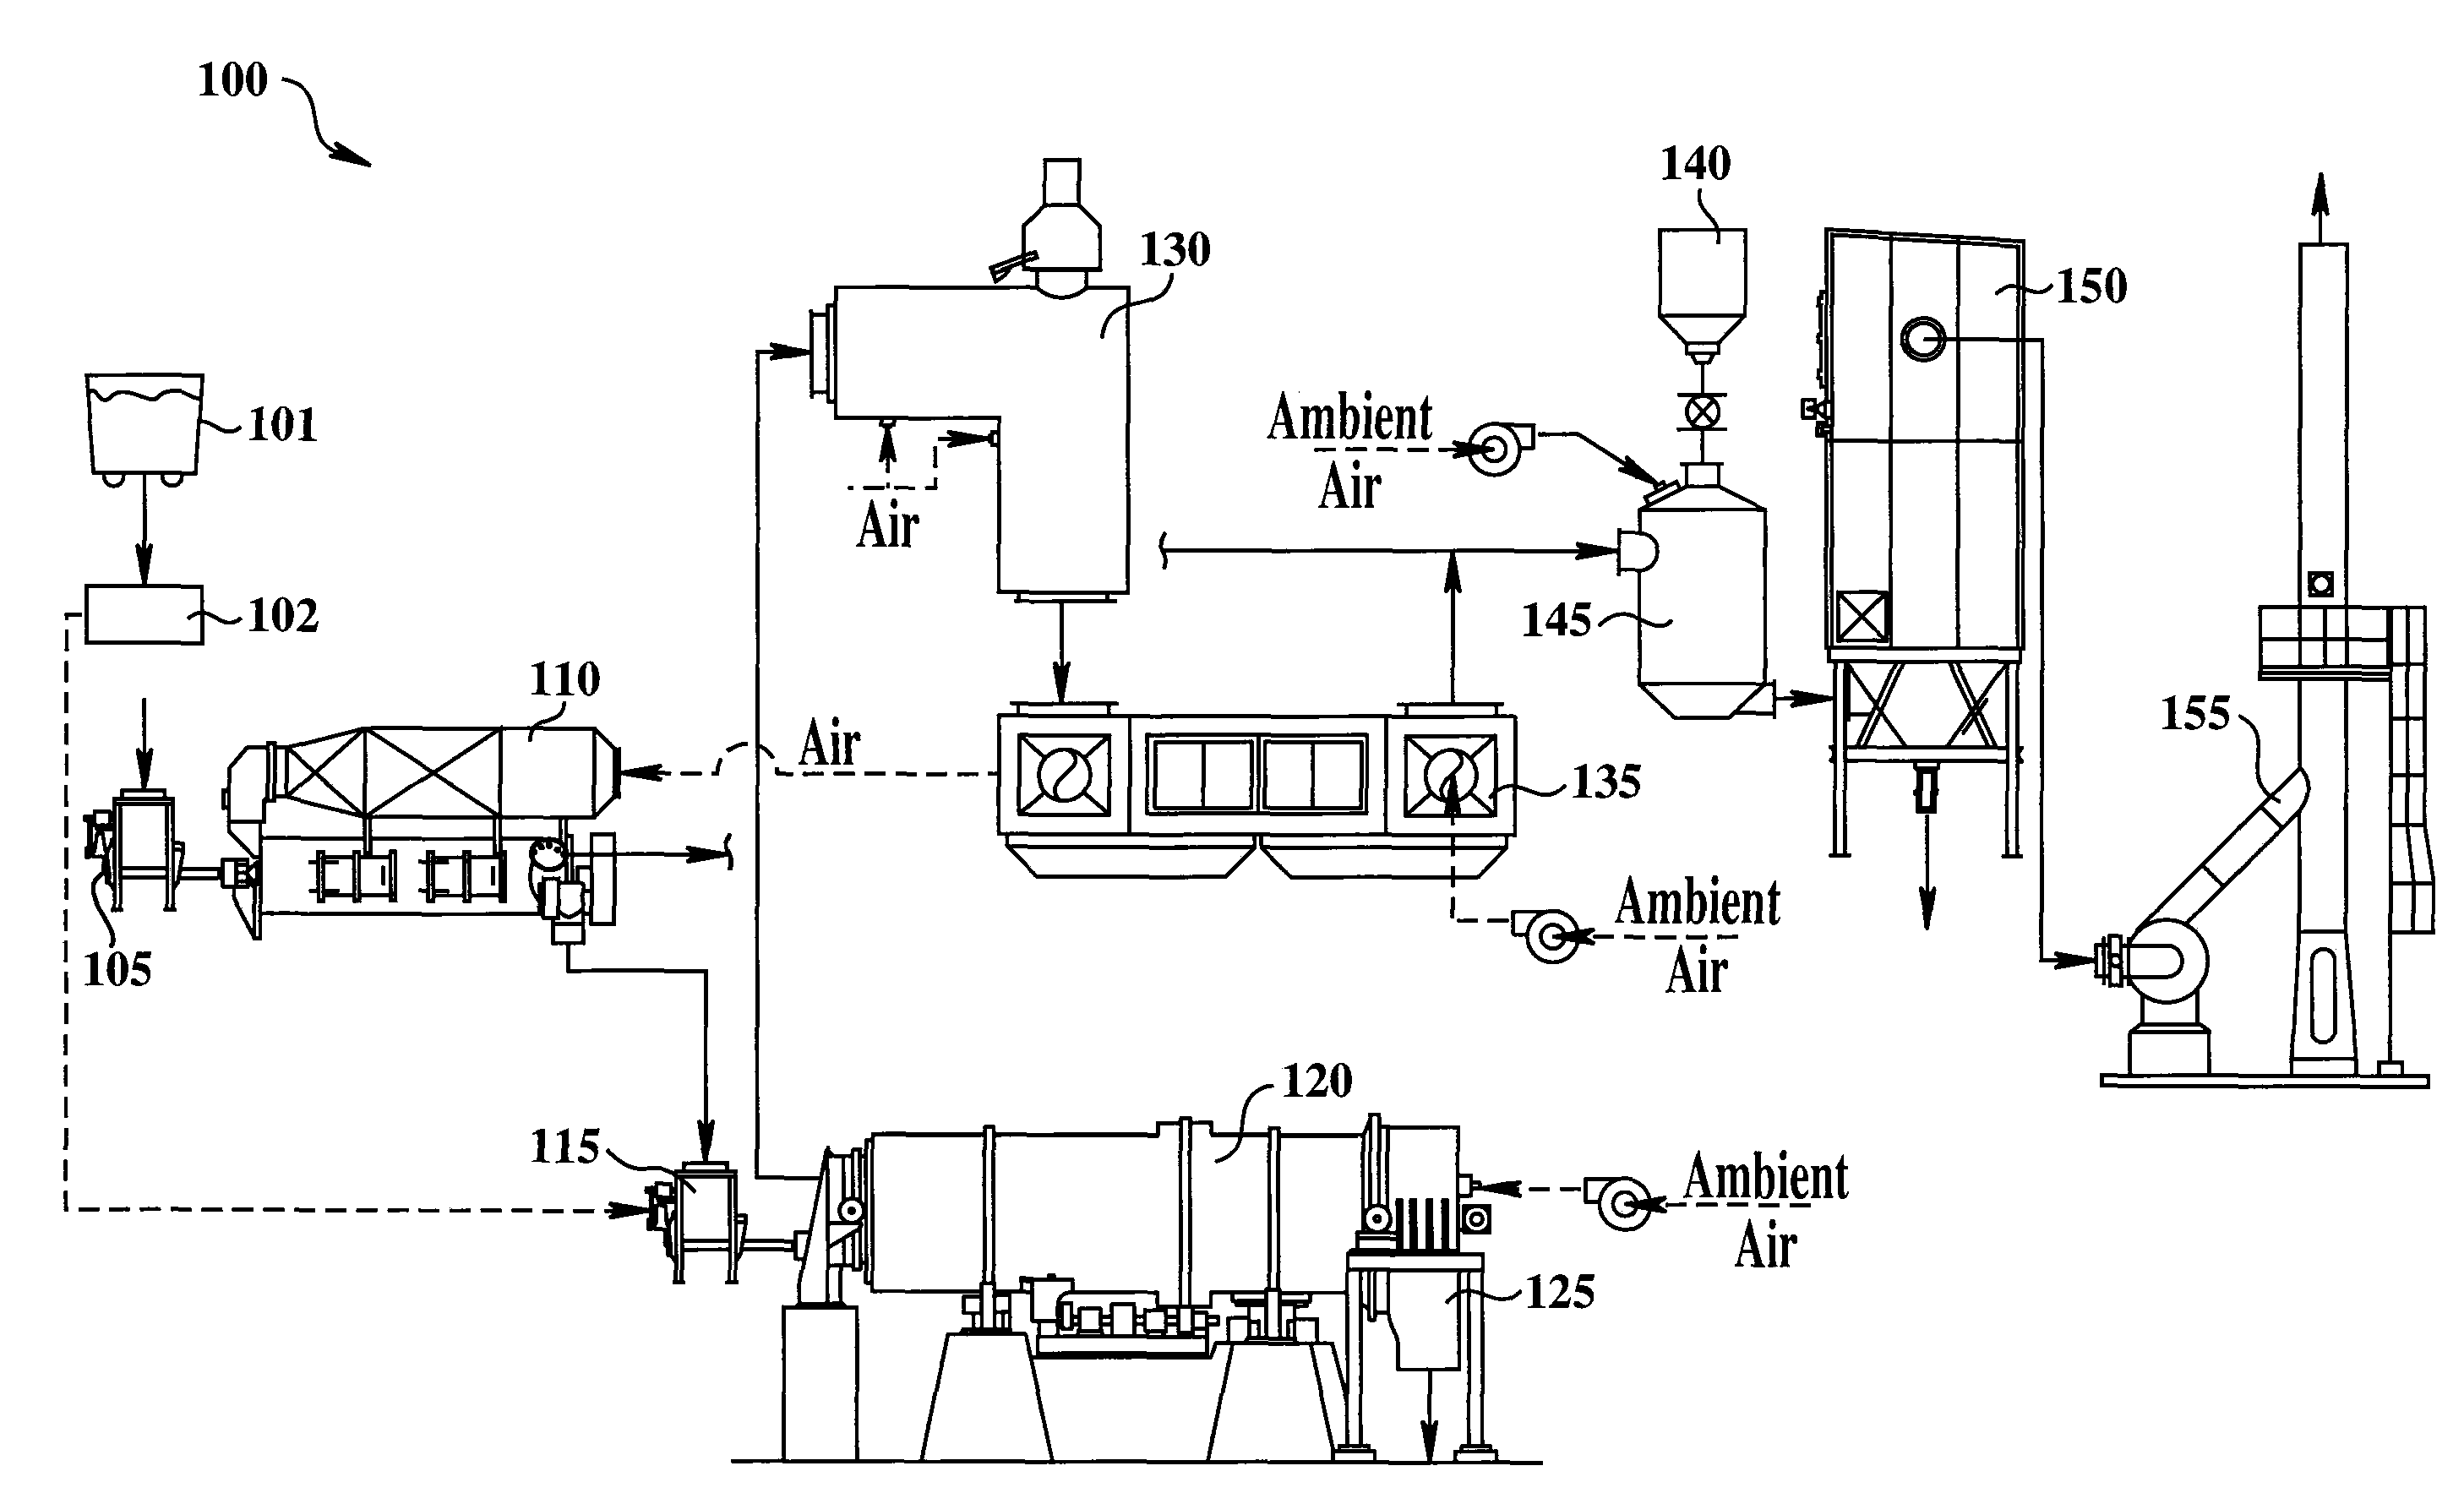 Systems and Methods for Processing Municipal Wastewater Treatment Sewage Sludge